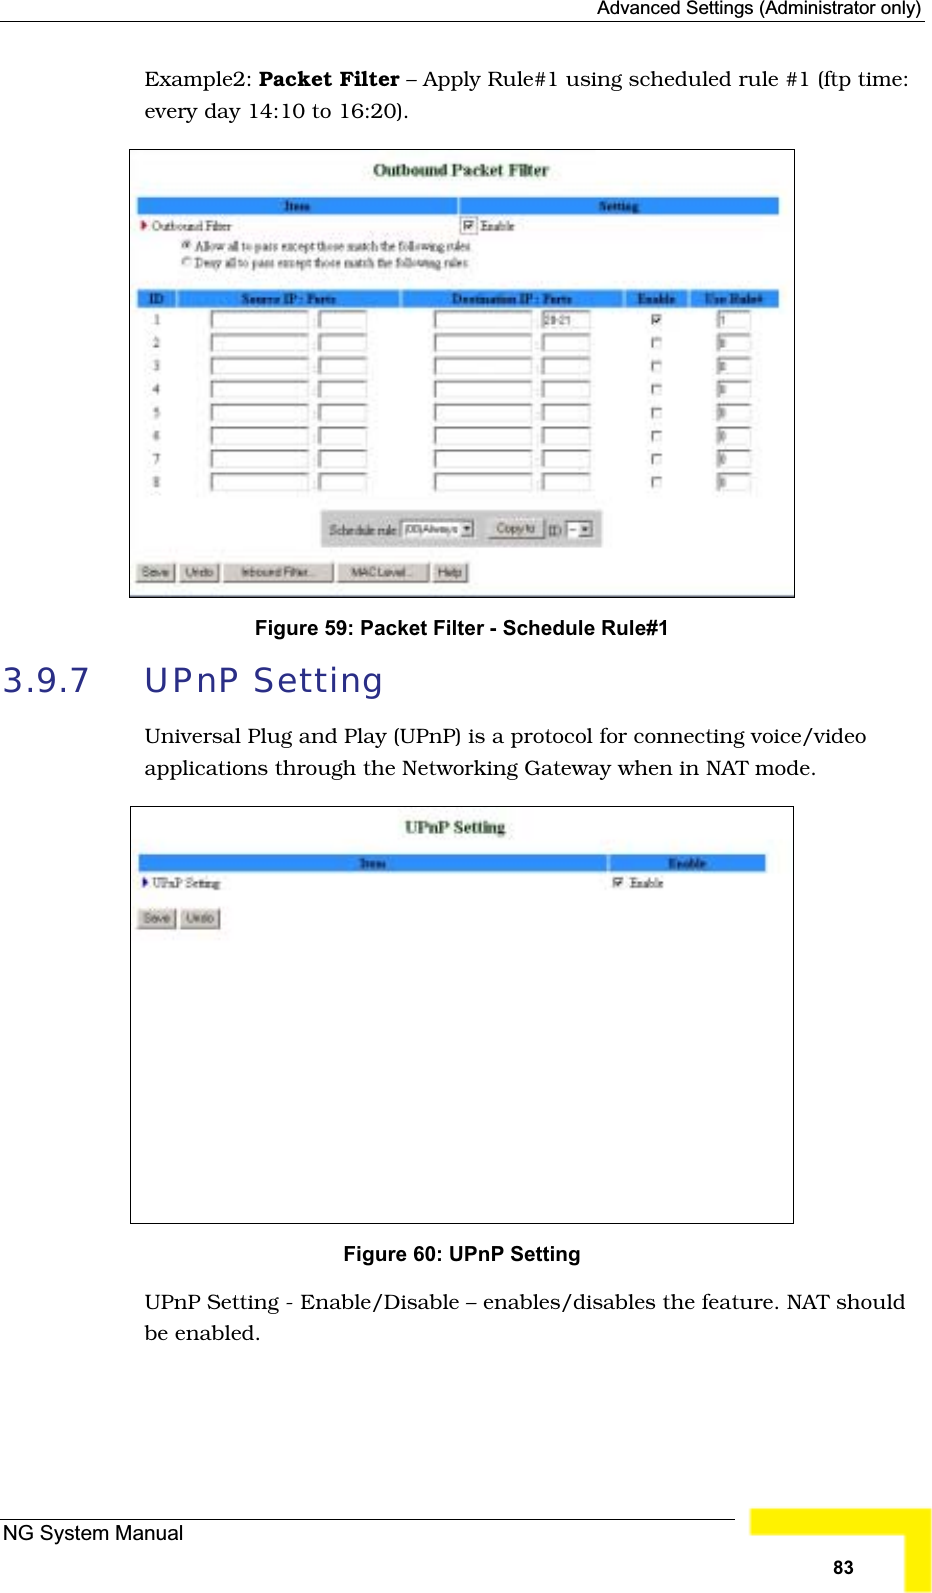 Advanced Settings (Administrator only)Example2: Packet Filter – Apply Rule#1 using scheduled rule #1 (ftp time:every day 14:10 to 16:20).Figure 59: Packet Filter - Schedule Rule#1 3.9.7 UPnP SettingUniversal Plug and Play (UPnP) is a protocol for connecting voice/videoapplications through the Networking Gateway when in NAT mode.Figure 60: UPnP SettingUPnP Setting - Enable/Disable – enables/disables the feature. NAT should be enabled.NG System Manual83